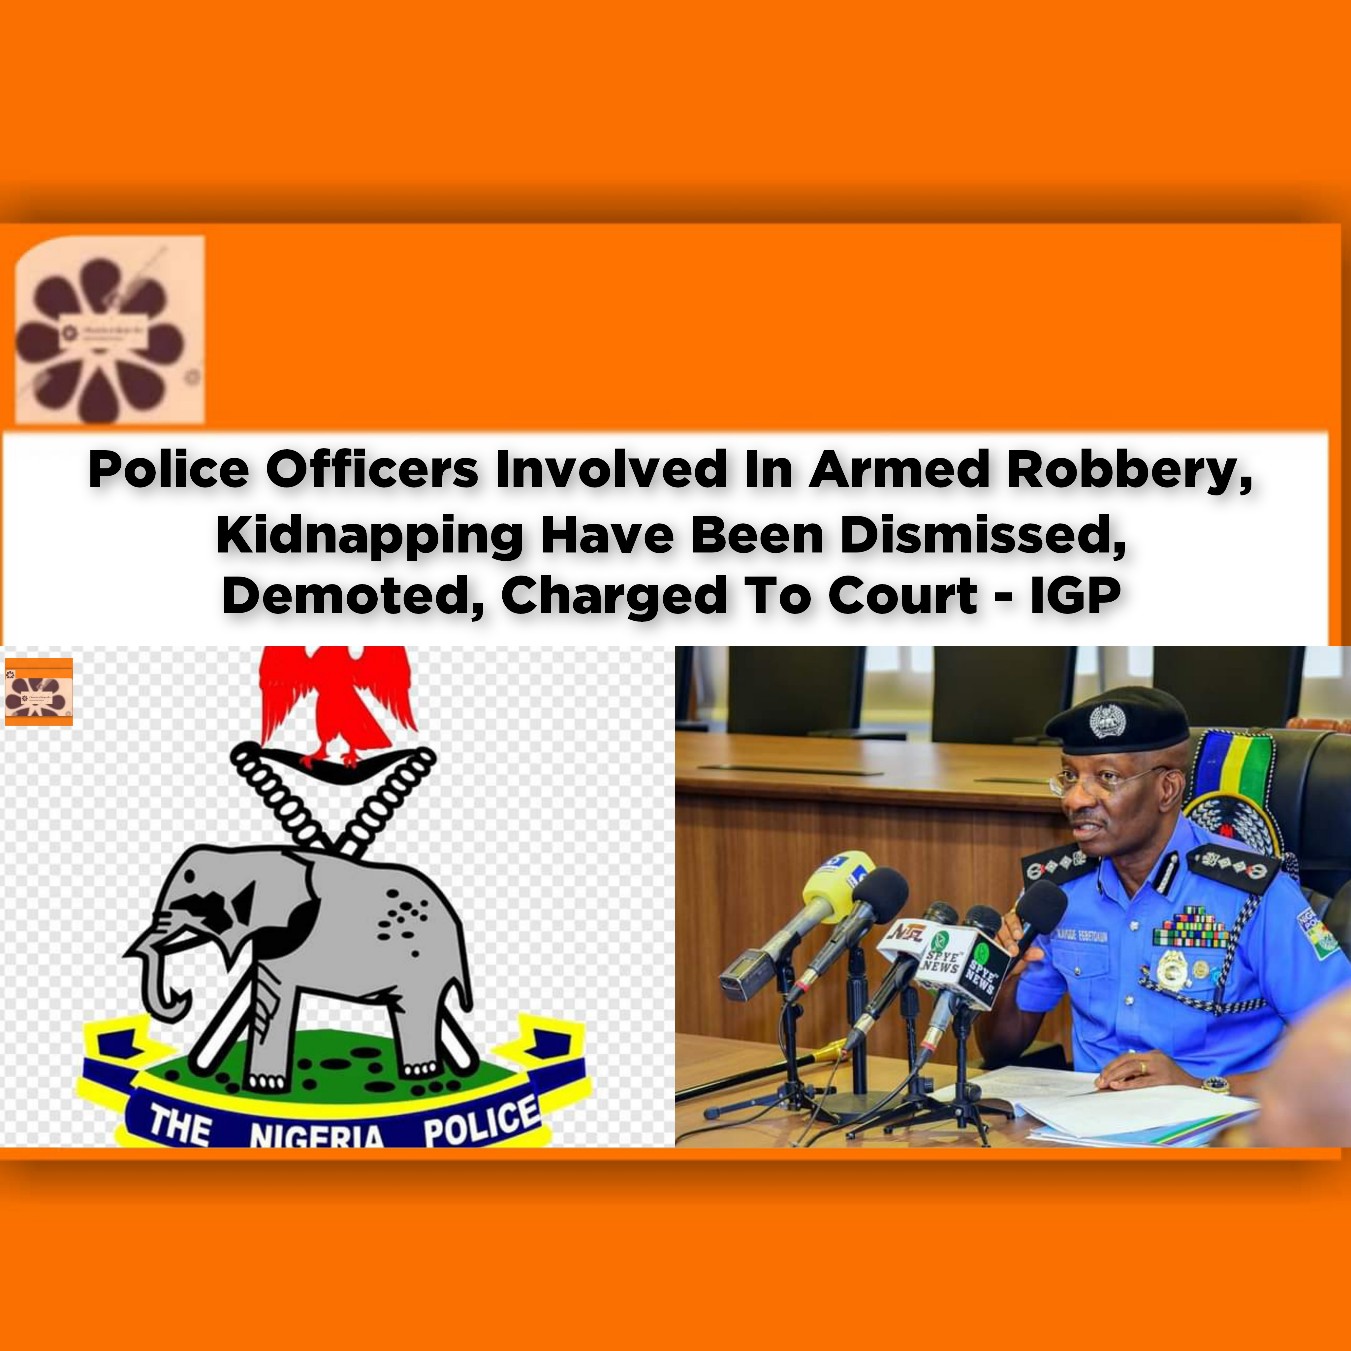 Police Officers Involved In Armed Robbery, Kidnapping Have Been Dismissed, Demoted, Charged To Court - IGP ~ OsazuwaAkonedo #PEPC